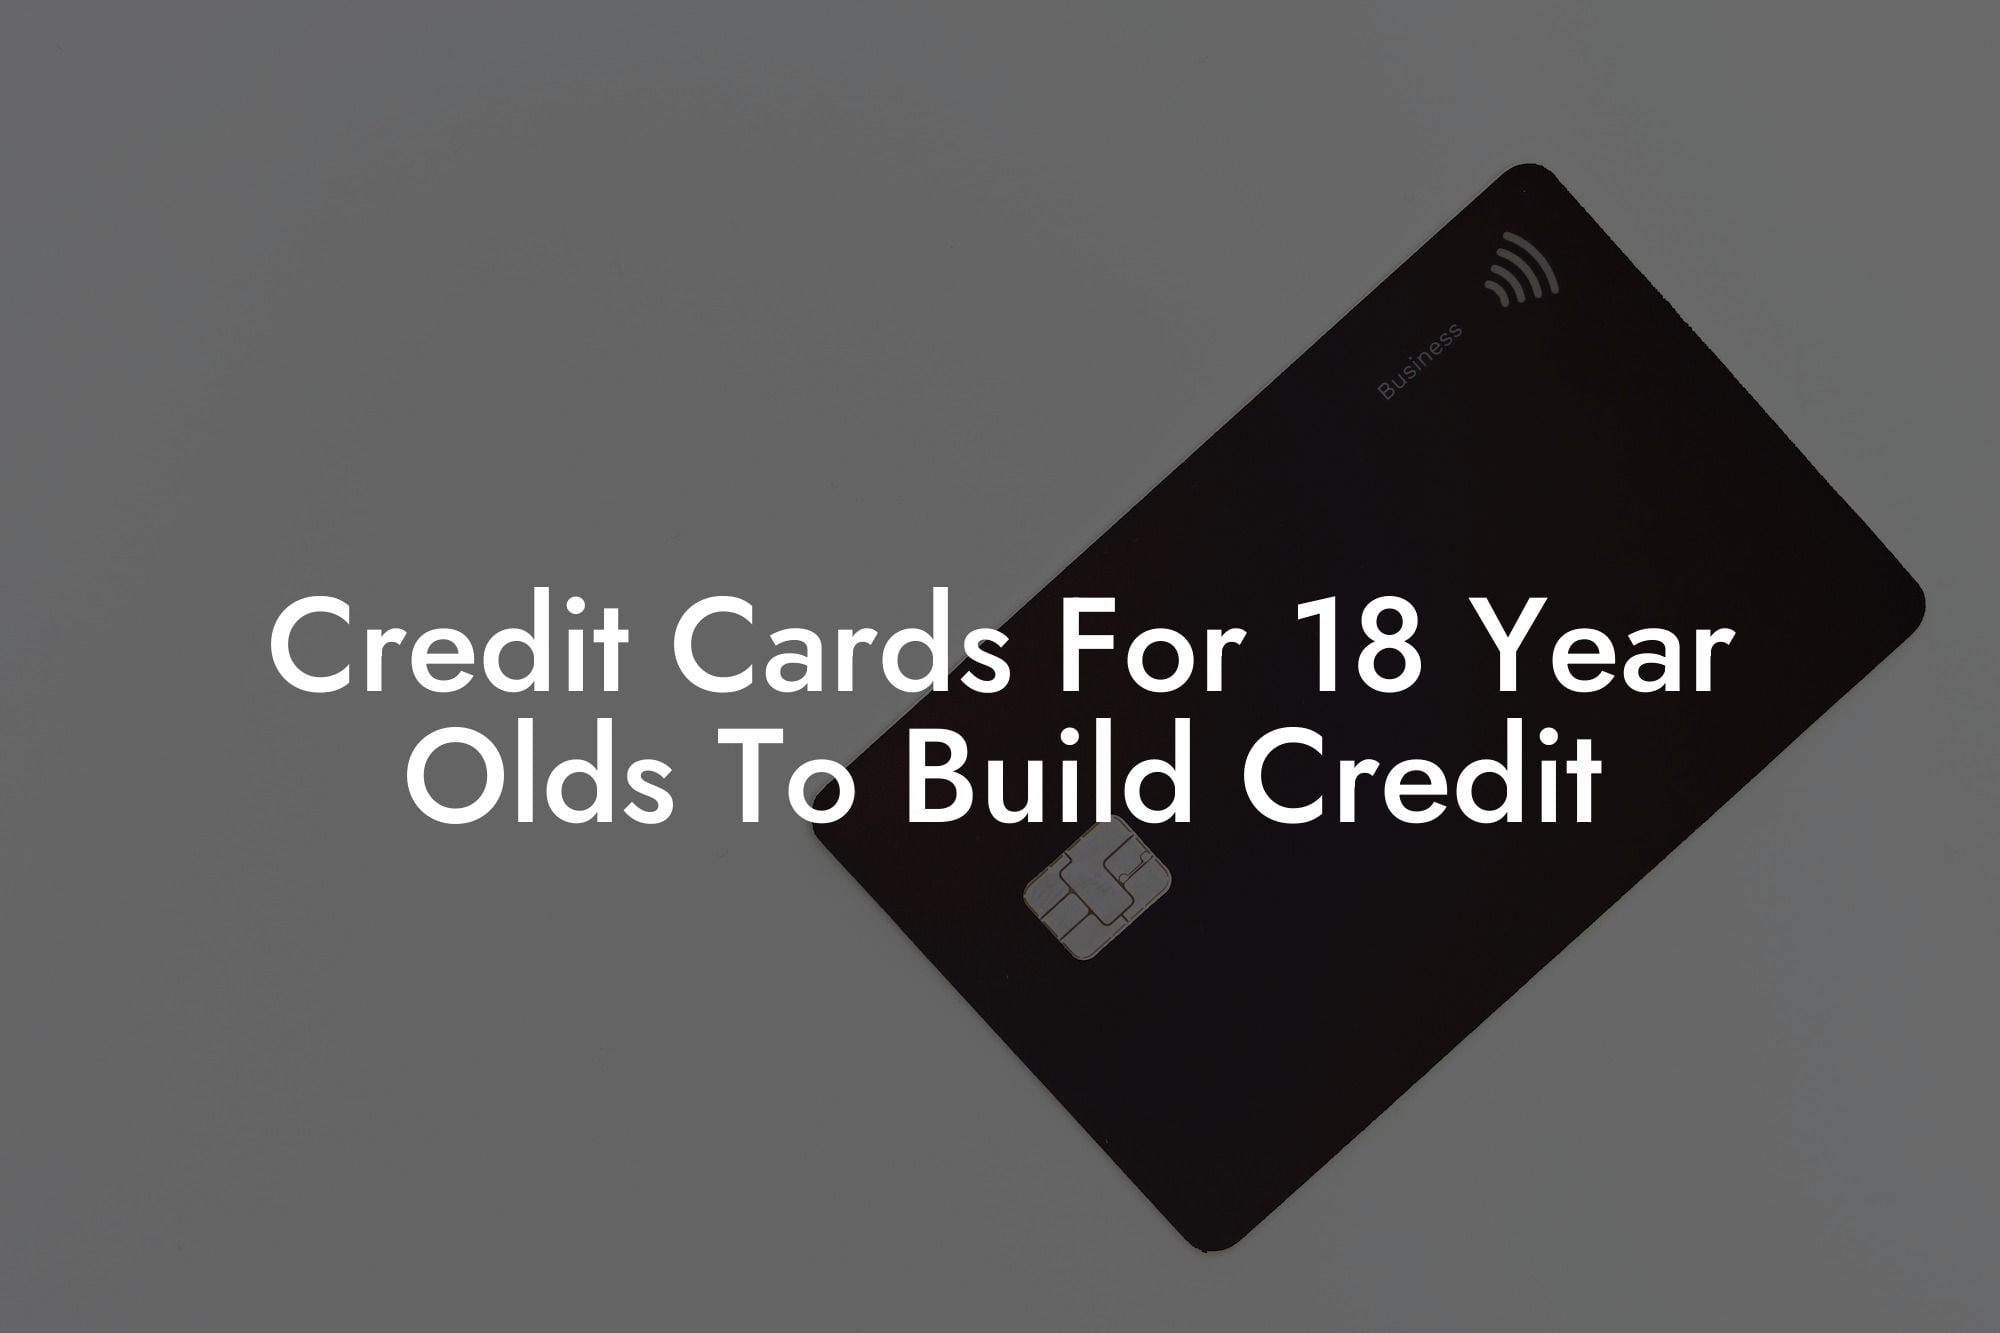 Credit Cards For 18 Year Olds To Build Credit